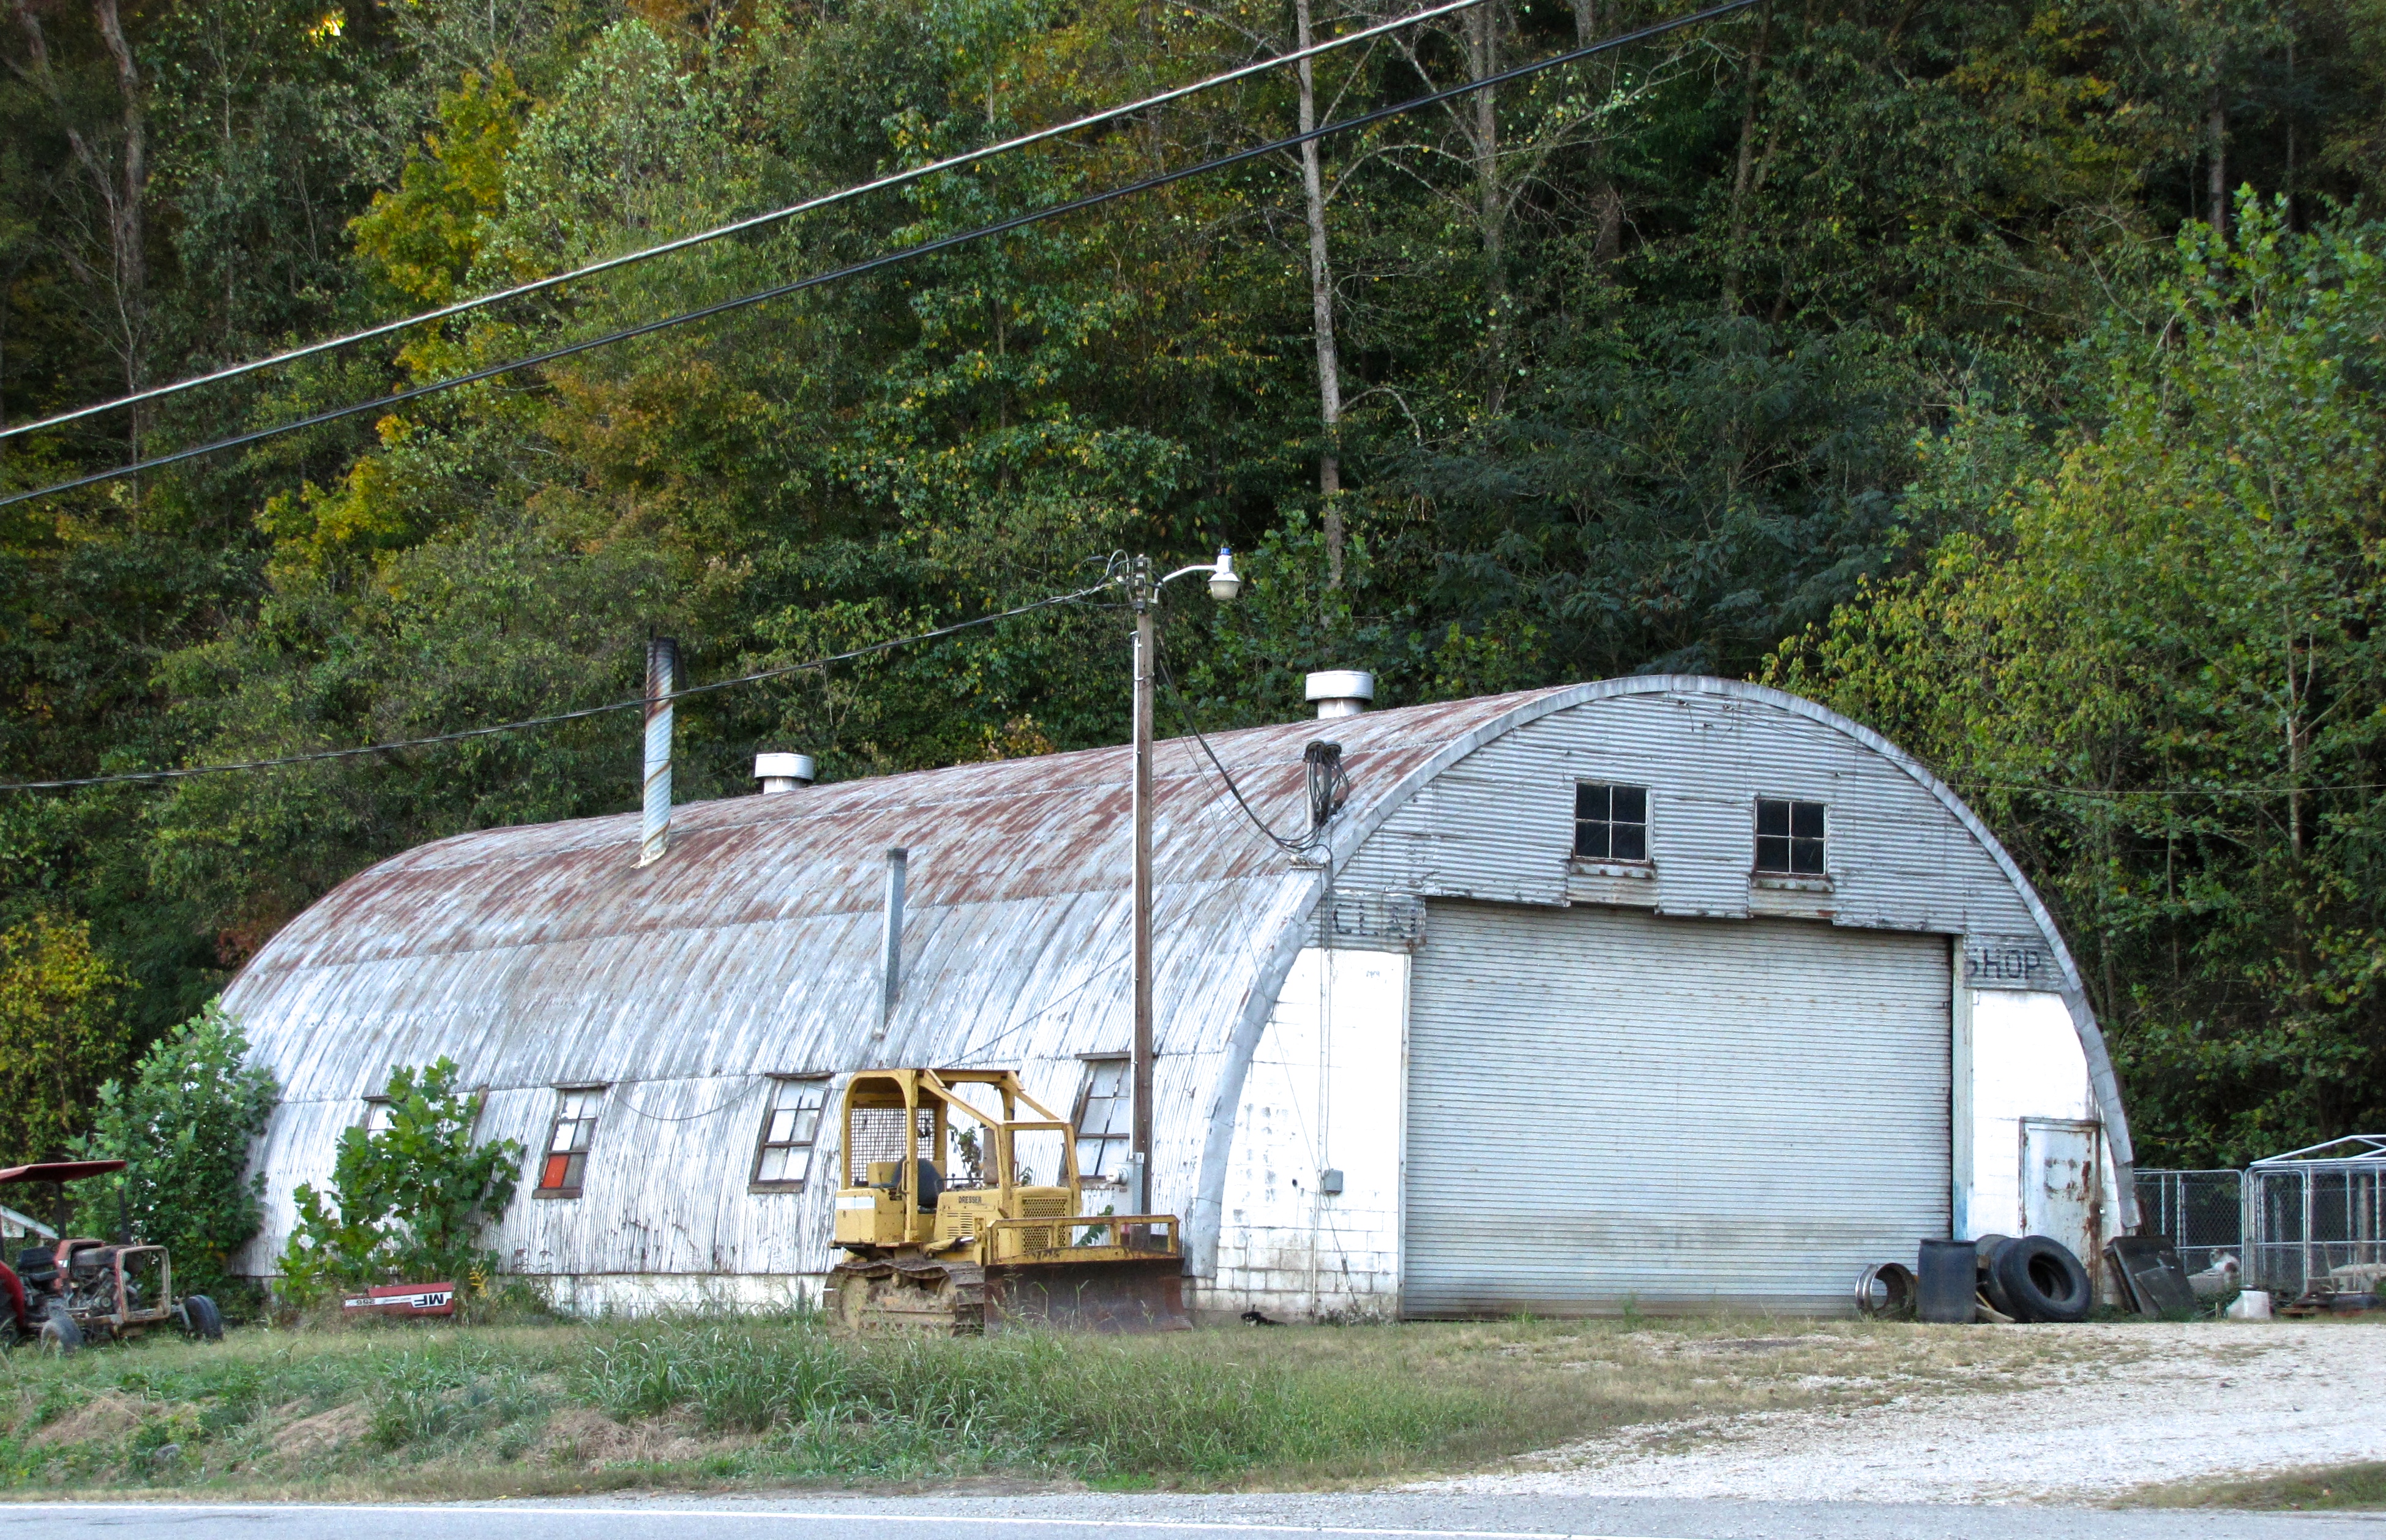 quonset hut in Copyright Notice, KY